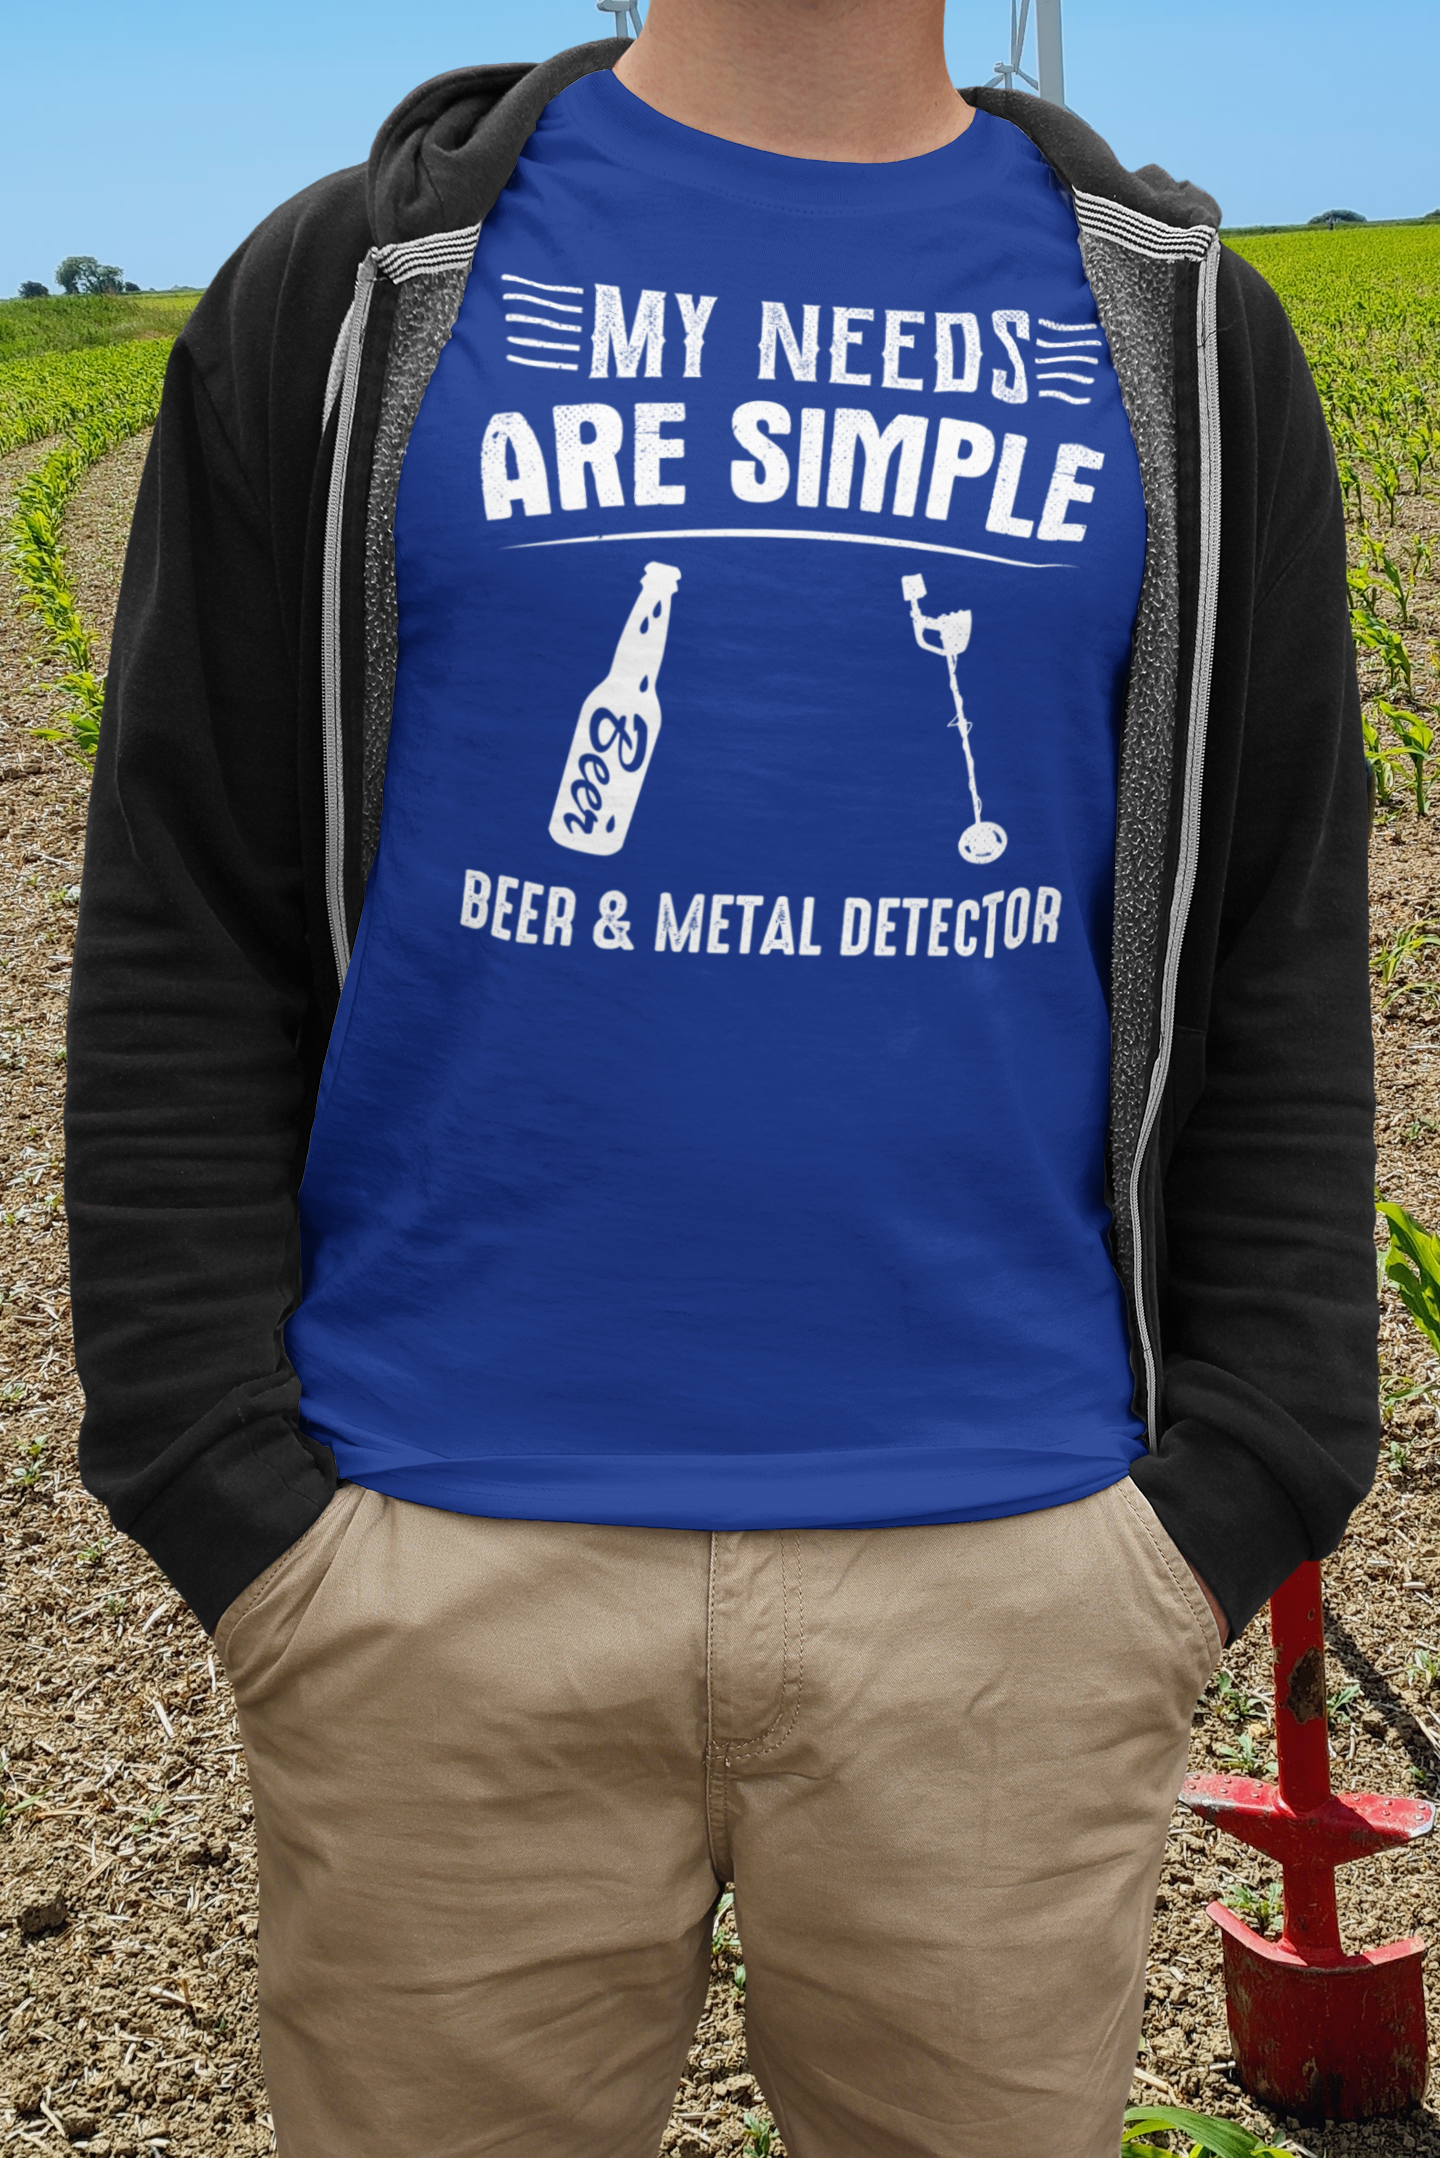 My needs are simple, beer and metal detector T-shirt